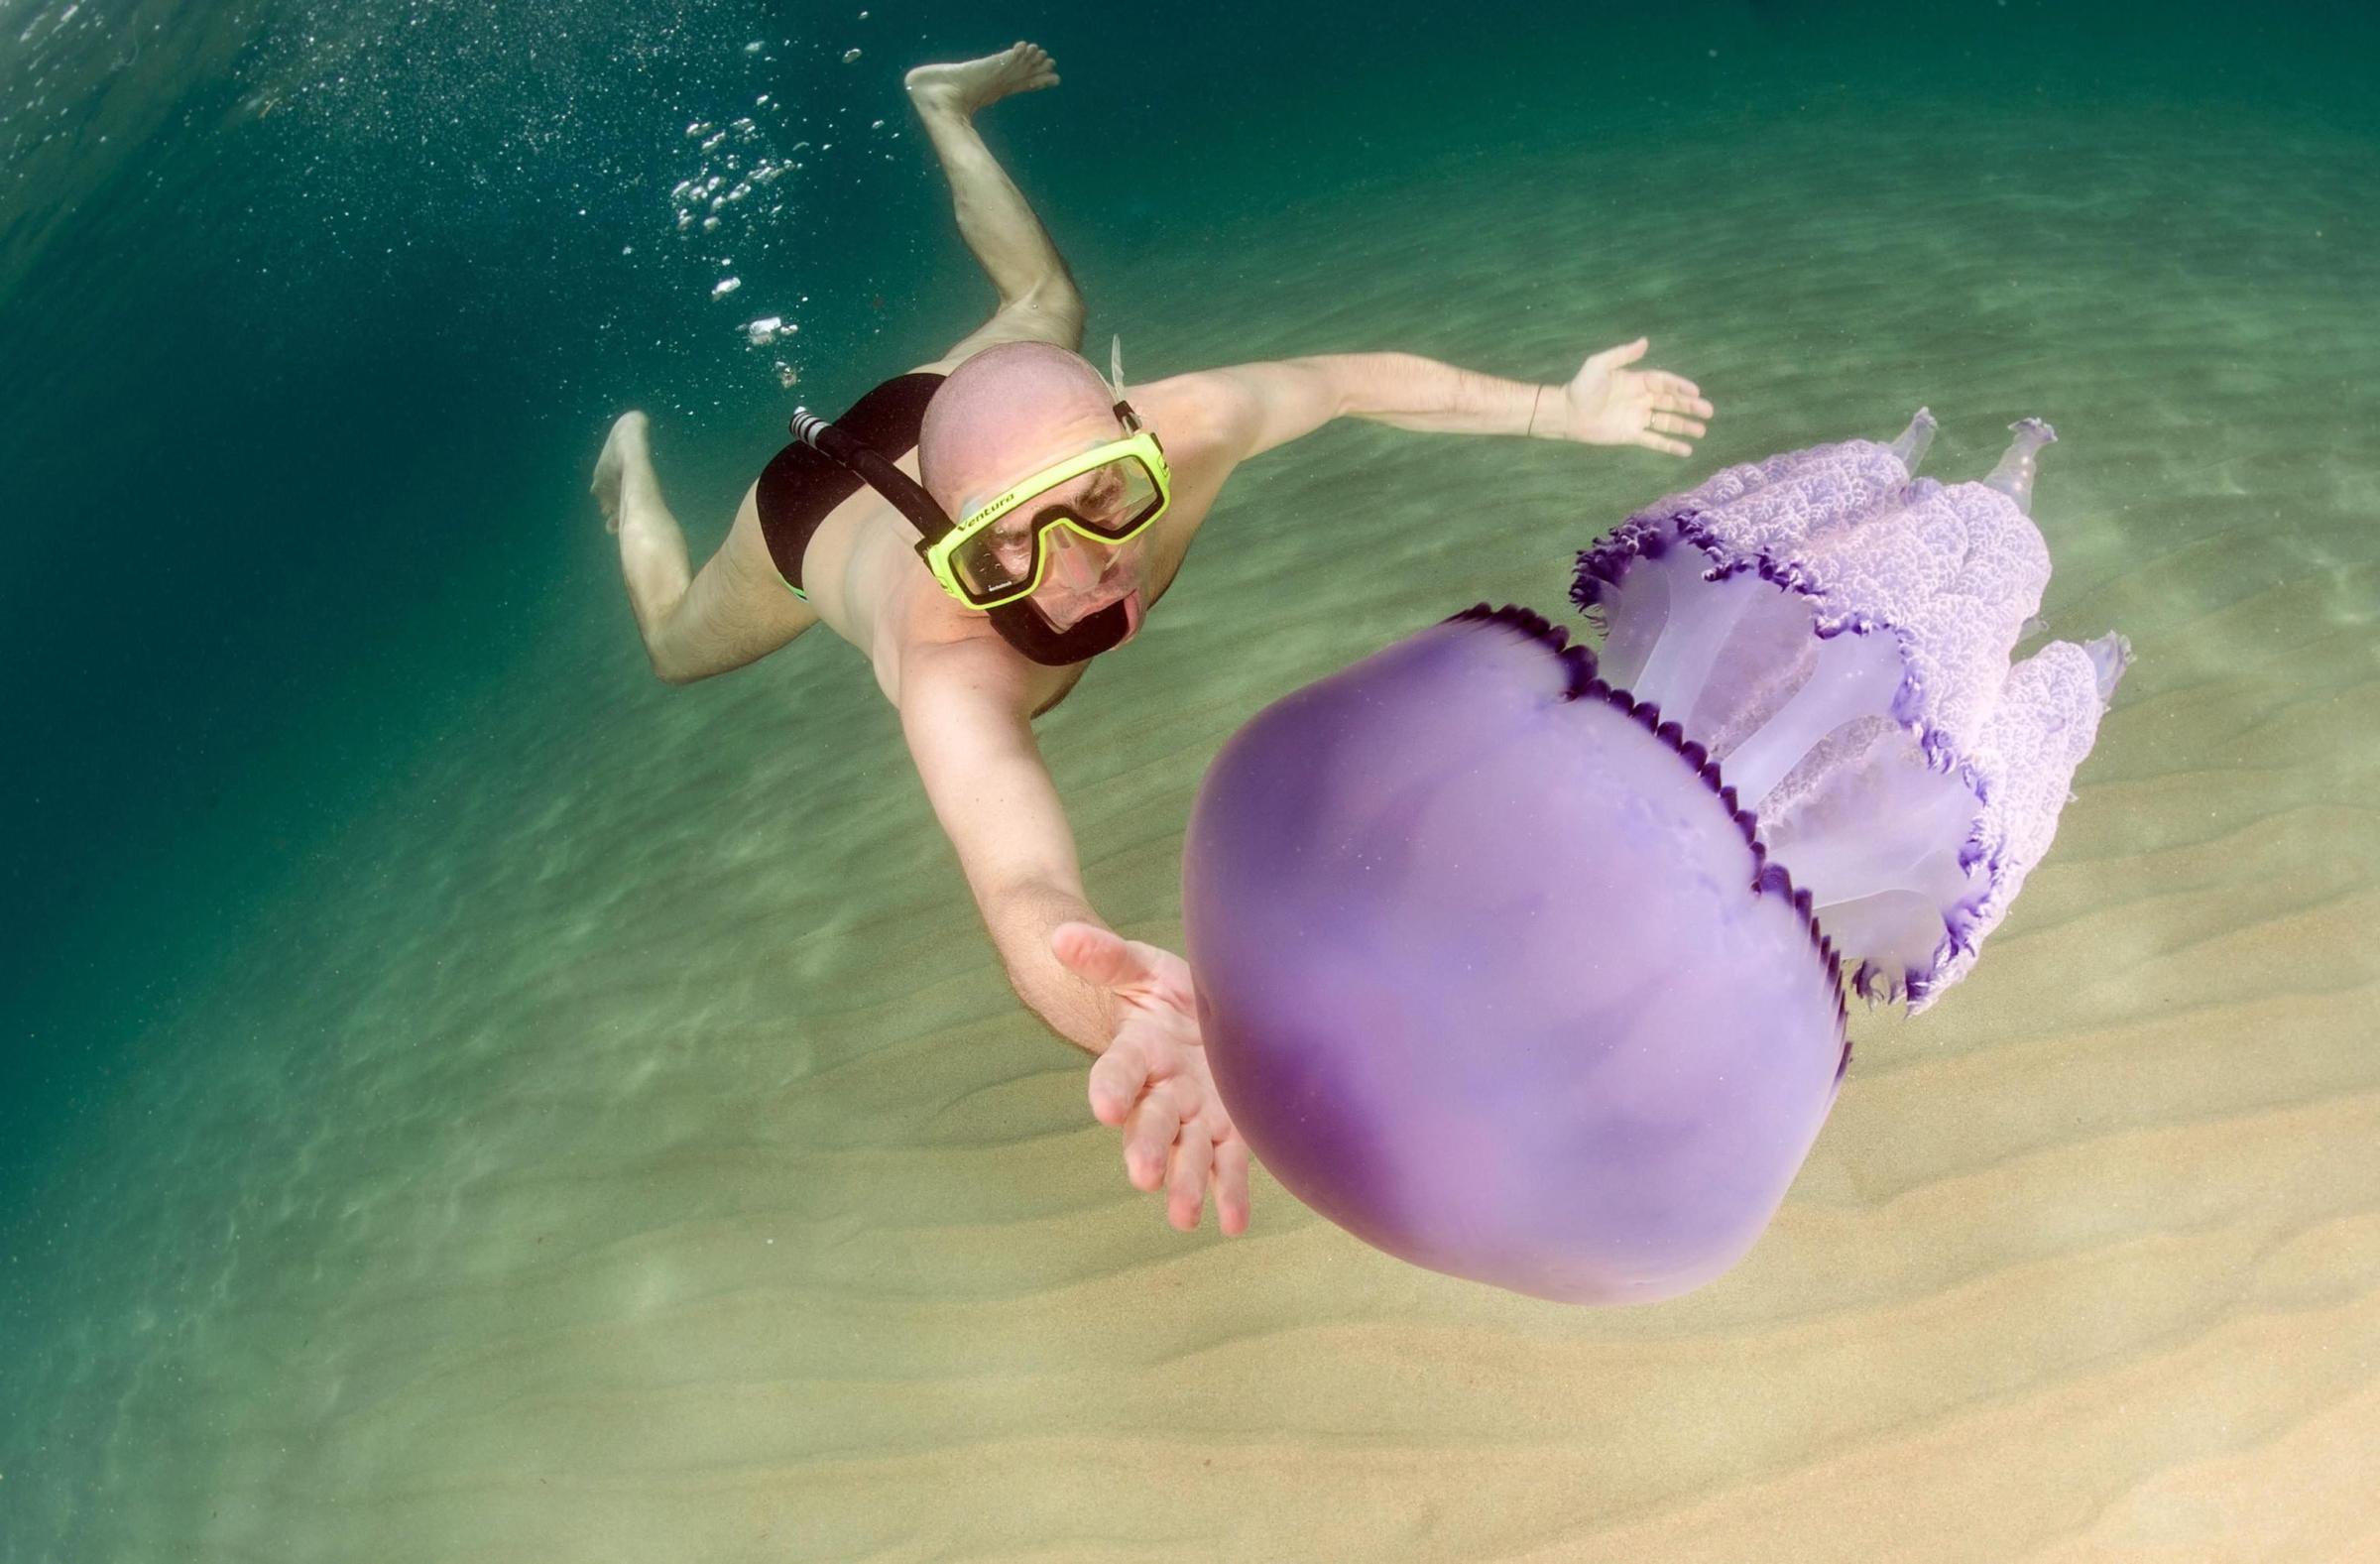 An under-water picture of a swimmer next to an exemplar of Rhizostoma Pulmo Jellyfish, that arrived close to Lotzorai (Nuoro), east coast of Sardinia island, Italy on August 2, 2014.